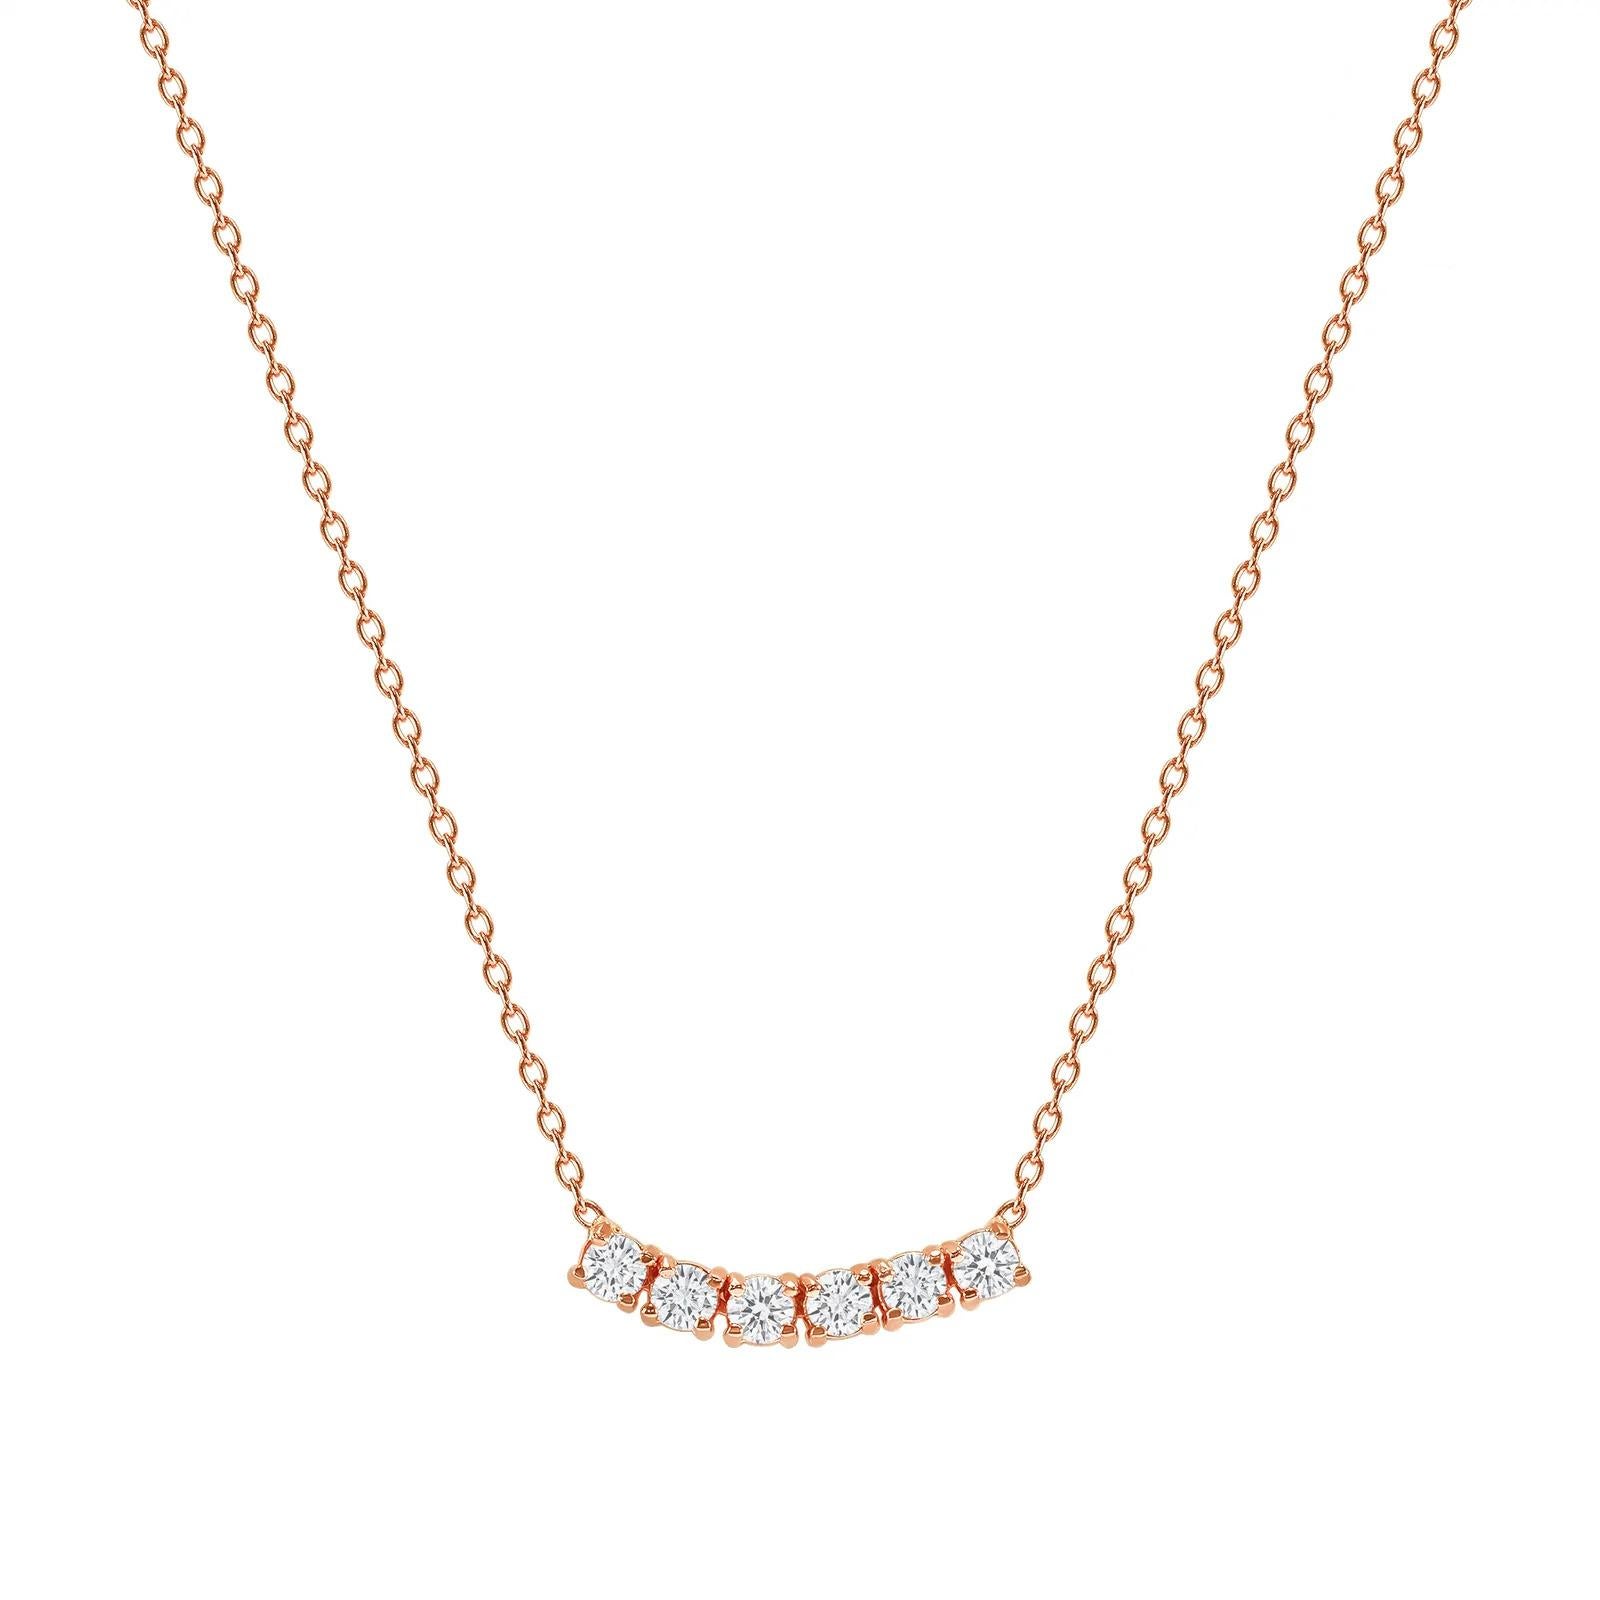 This petite, curved diamond necklace is crafted with gorgeous 14k gold set with six round diamonds.  

Gold: 14k 
Diamond Total Carats: 0.75 ct
Diamond Cut: Round (6 diamonds)
Diamond Clarity: VS
Diamond Color: F
Color: Rose Gold
Necklace Length: 20